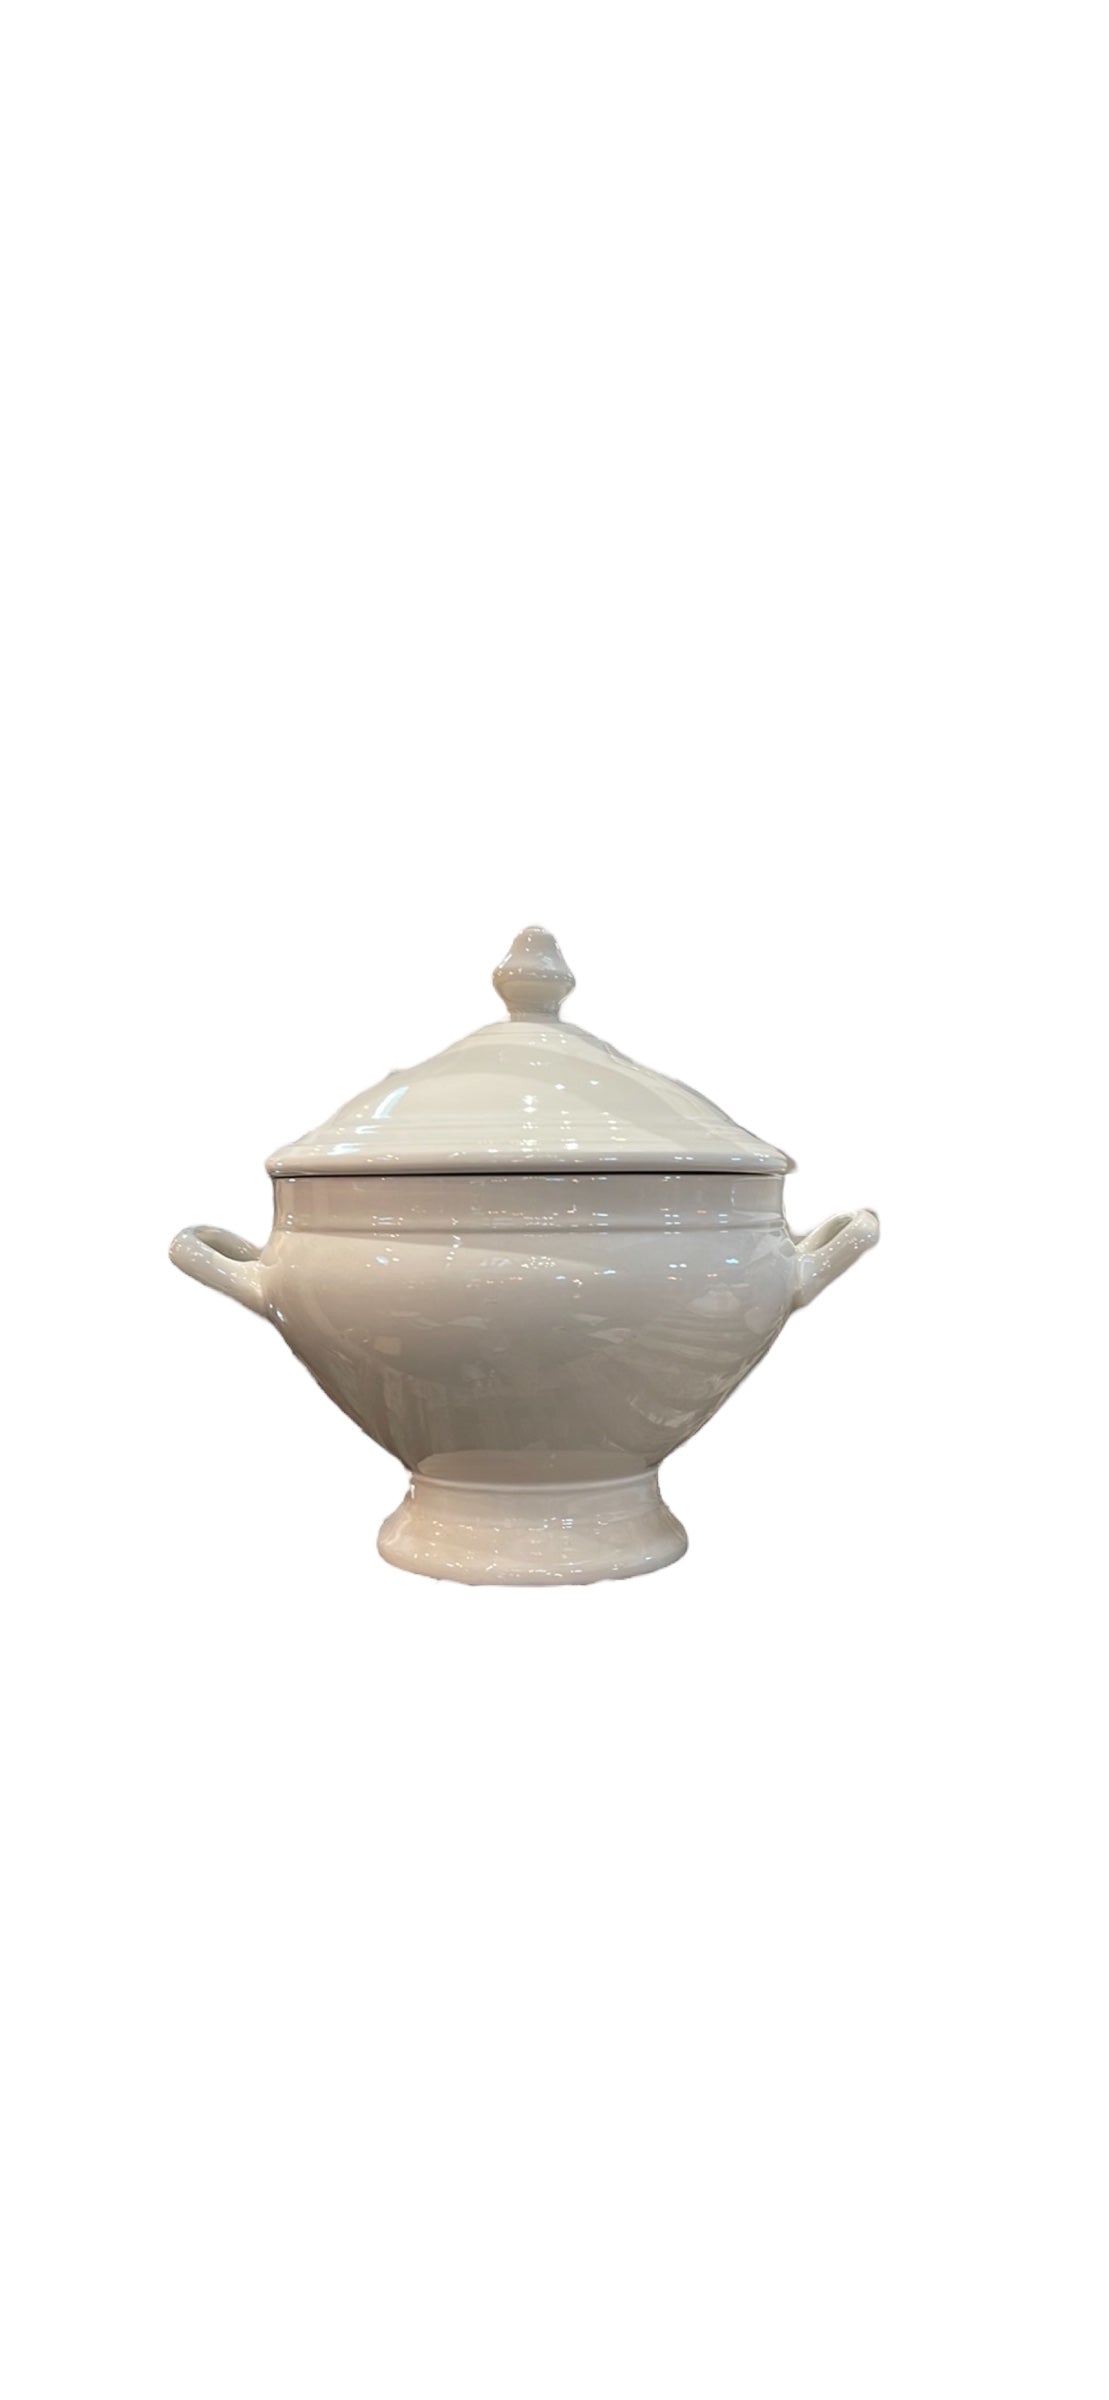 French Soup Tureens